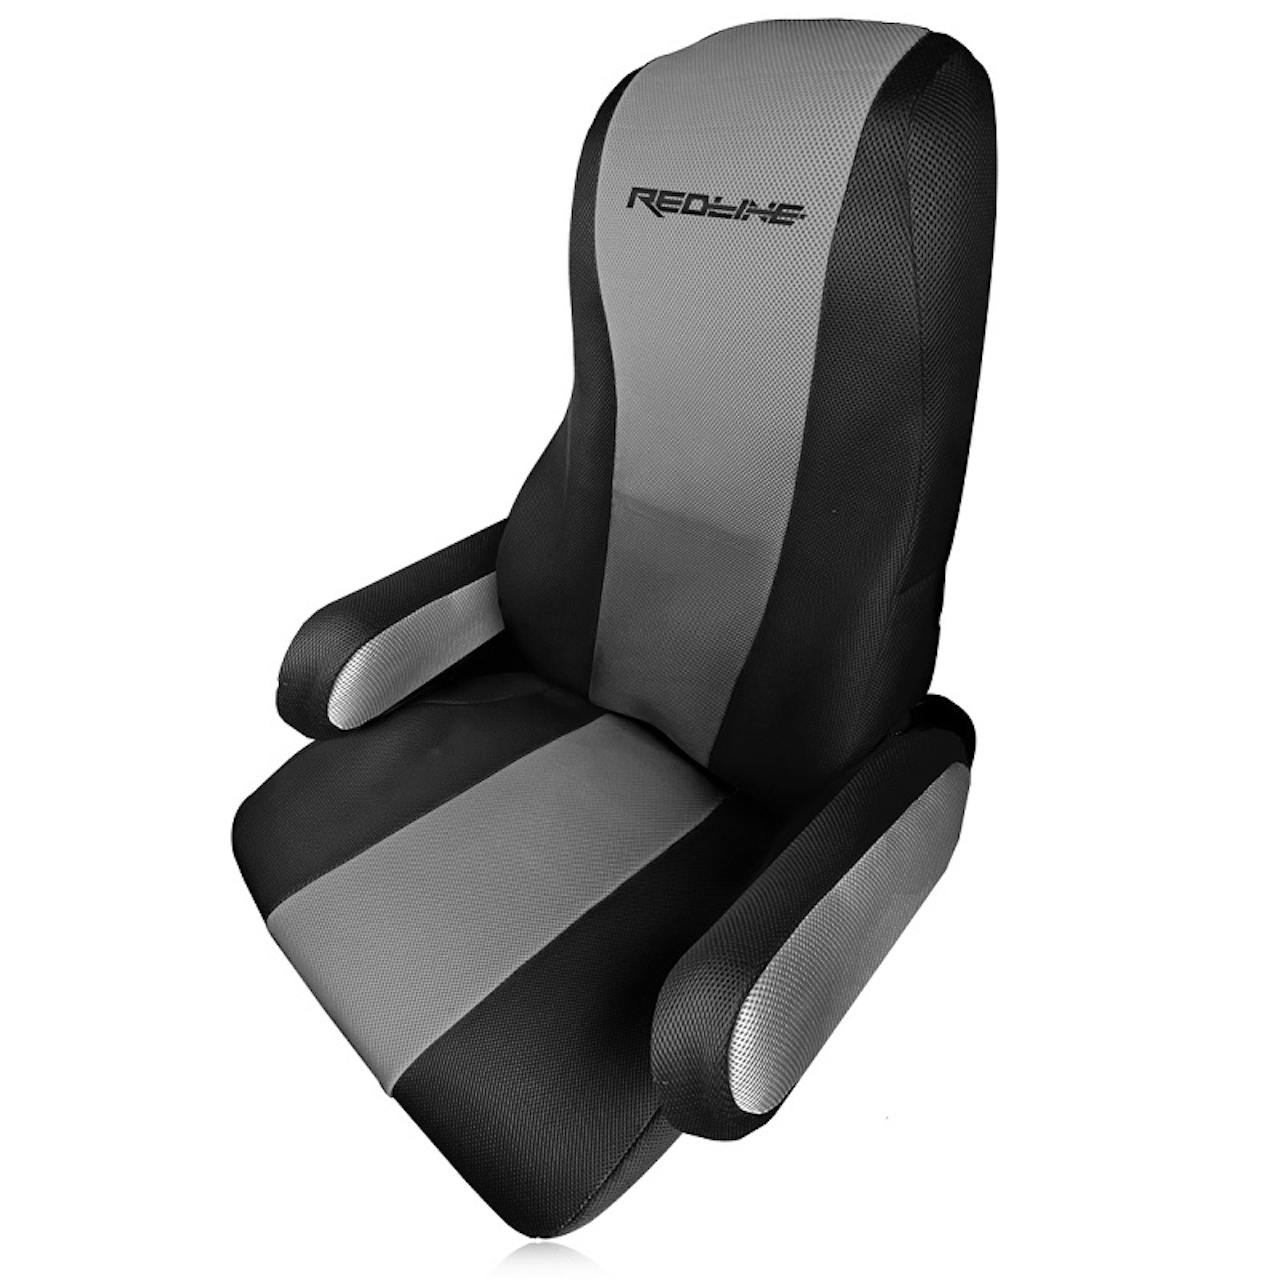 KENWORTH T680 T880 W990 Leather Seat Cover - Galaxy style - Seat